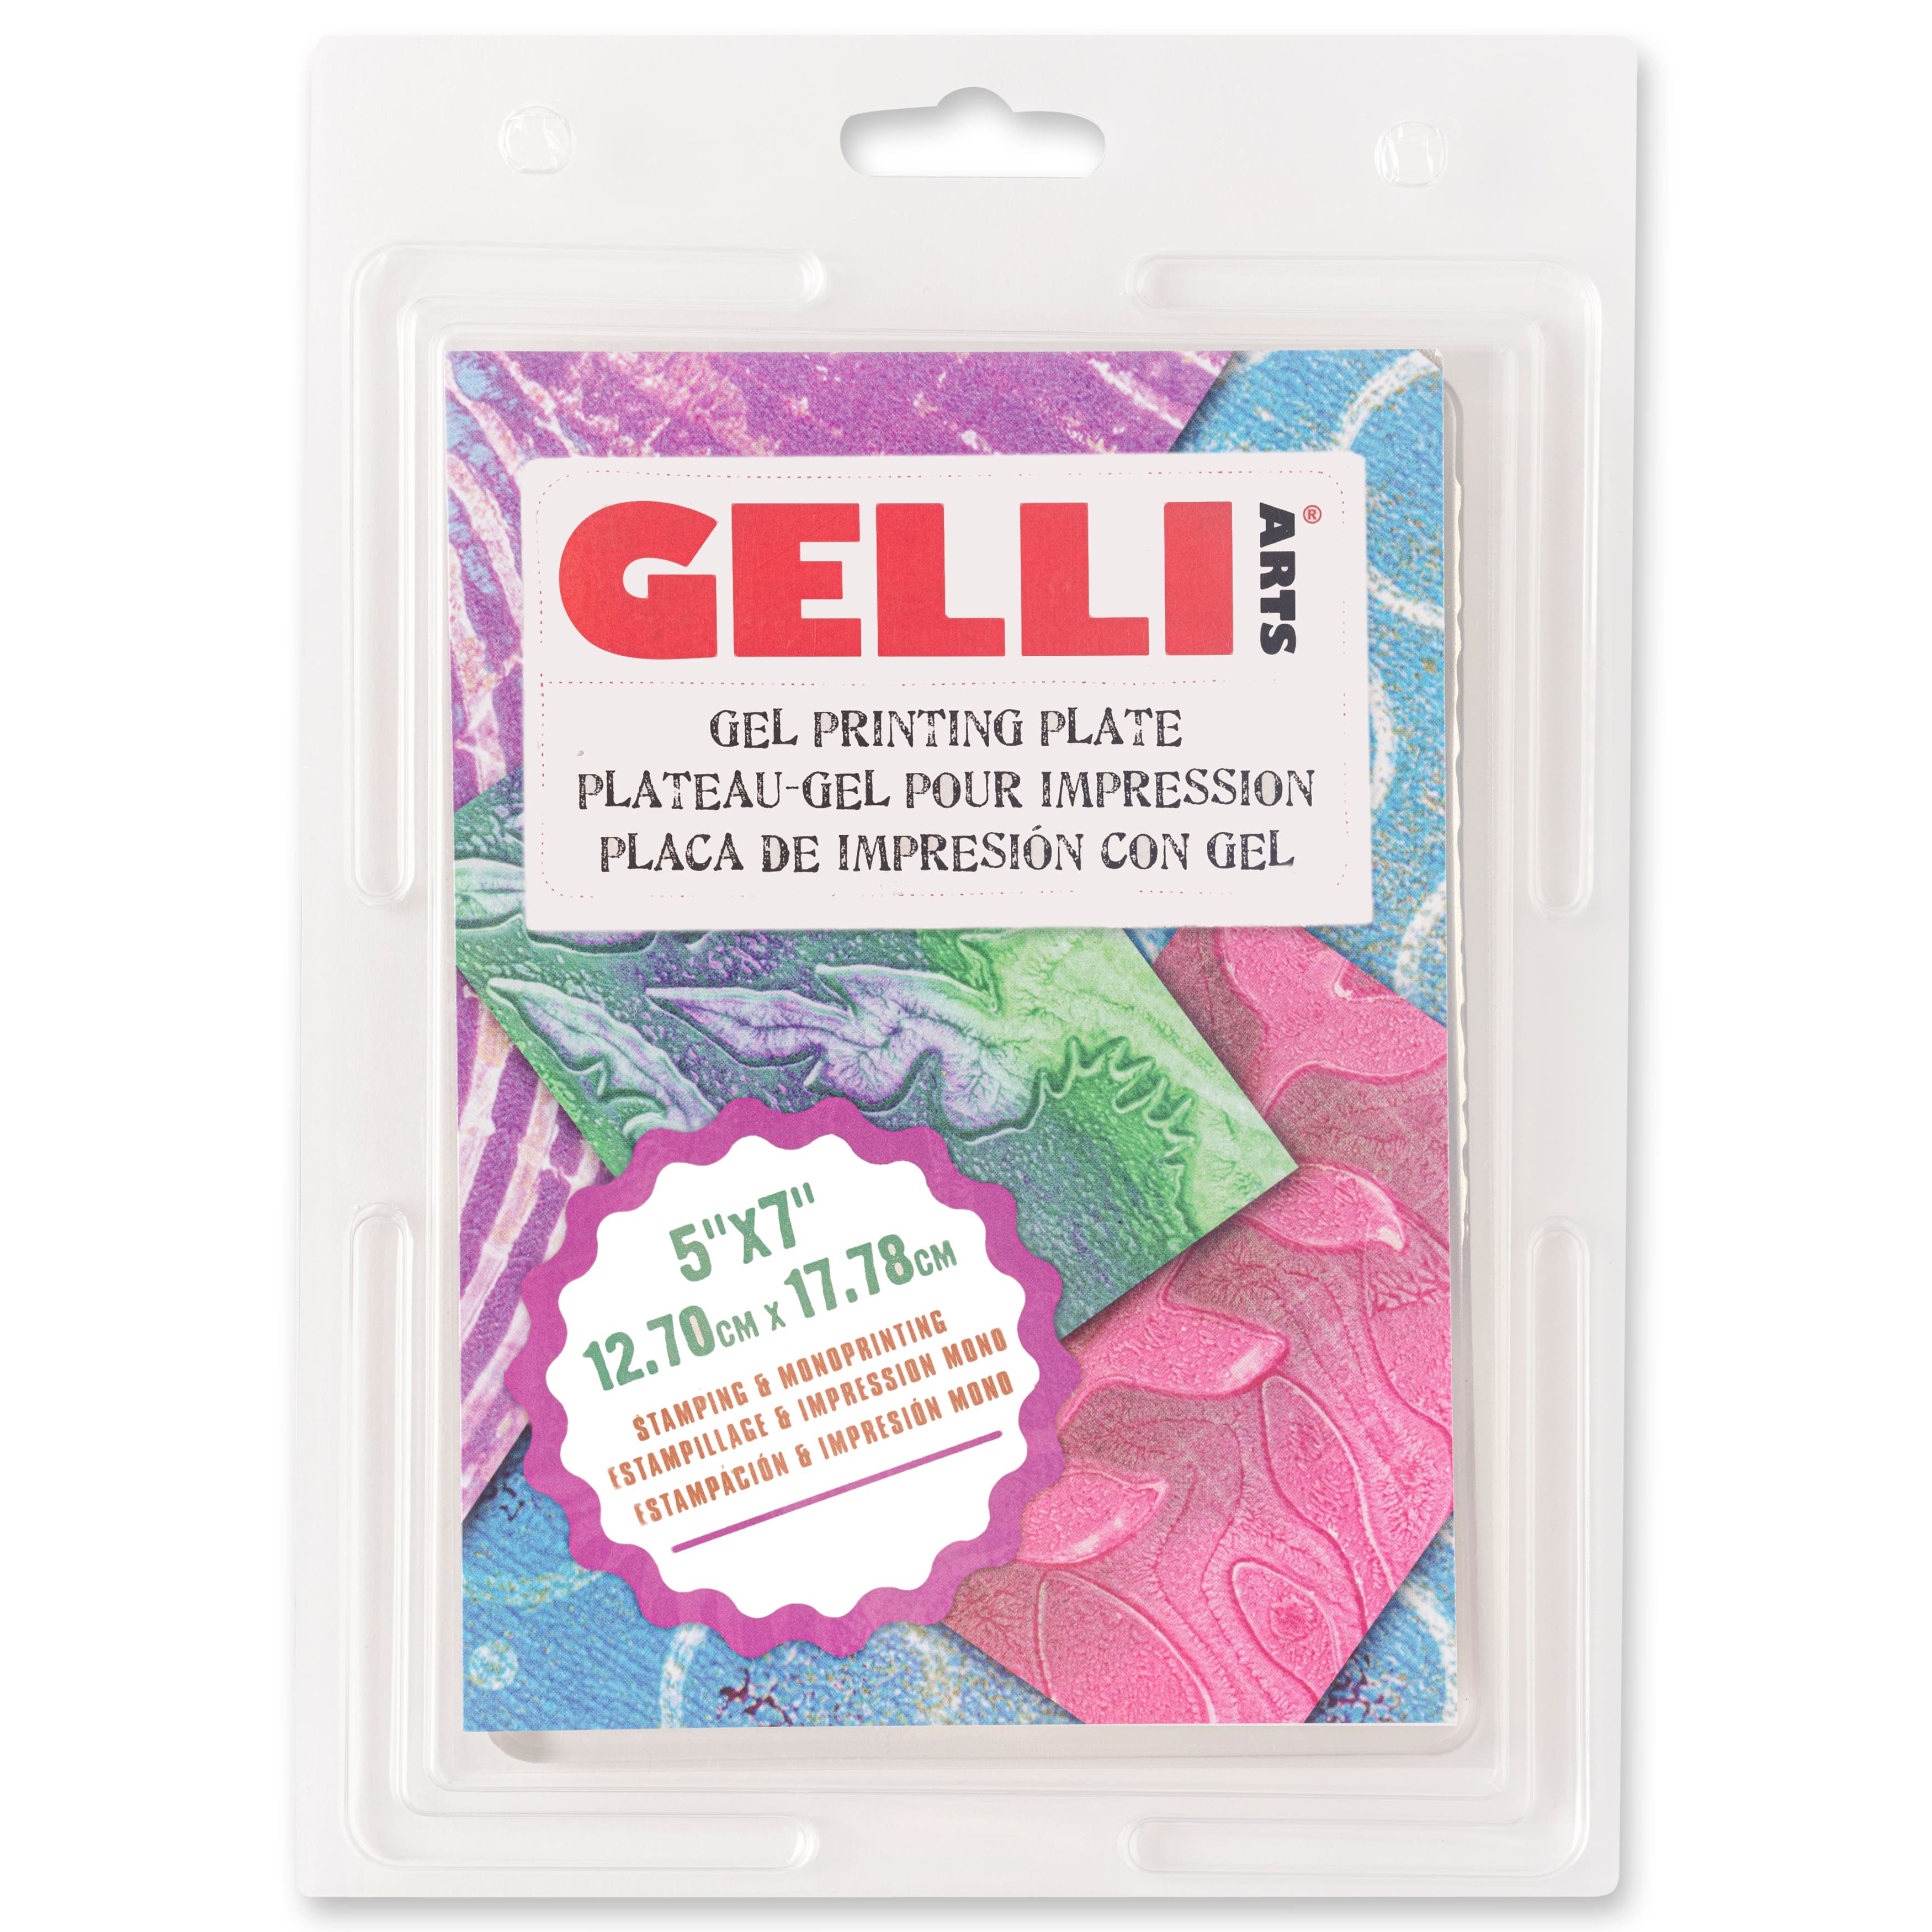  Gelli Arts Gel Printing Plate - 5 X 7 Gel Plate, Reusable Gel Printing  Plate, Printmaking Gelli Plate for Art, Clear Gel Monoprinting Plate, Gel Plate  Printing for Arts and Crafts